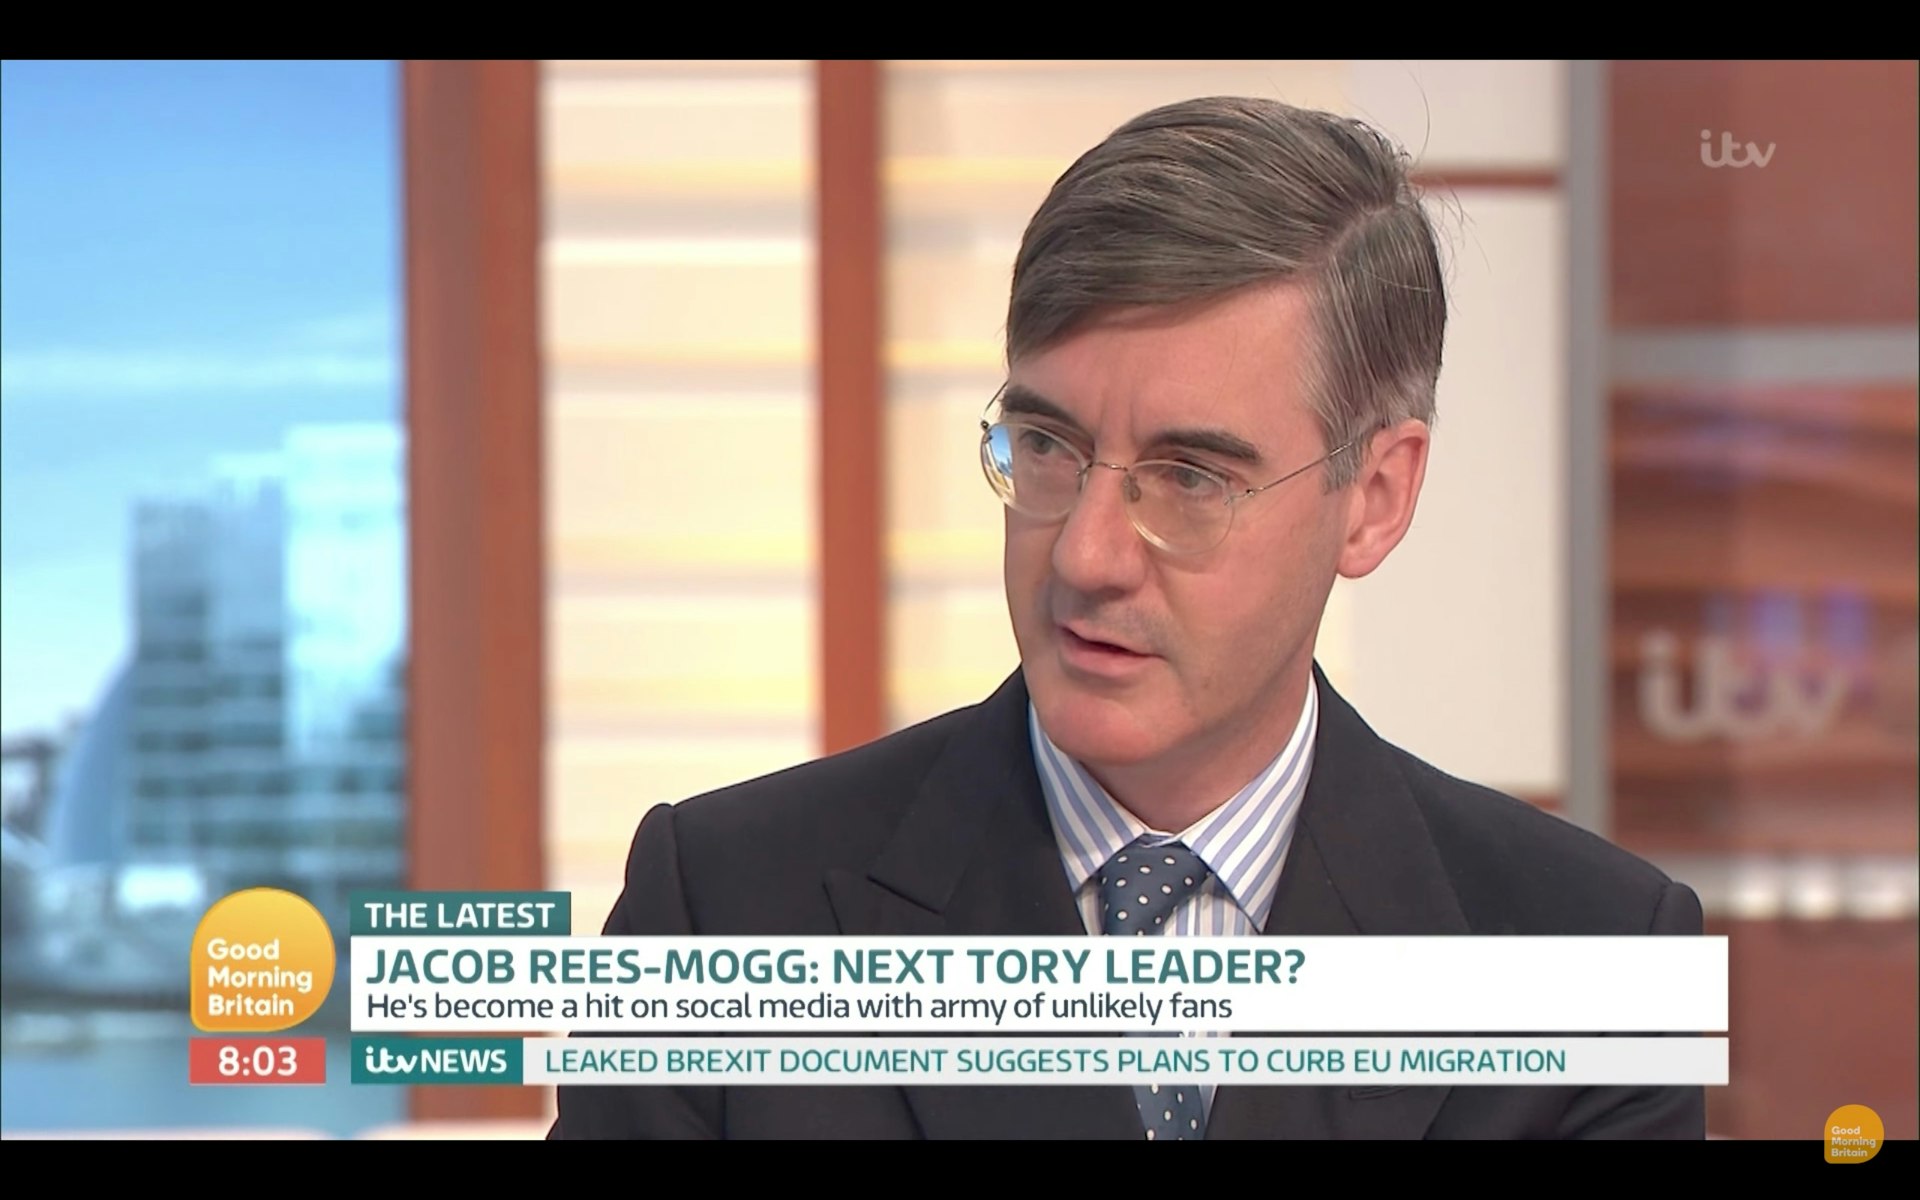 Jacob Rees-Mogg opposes abortion, including in cases of rape and incest